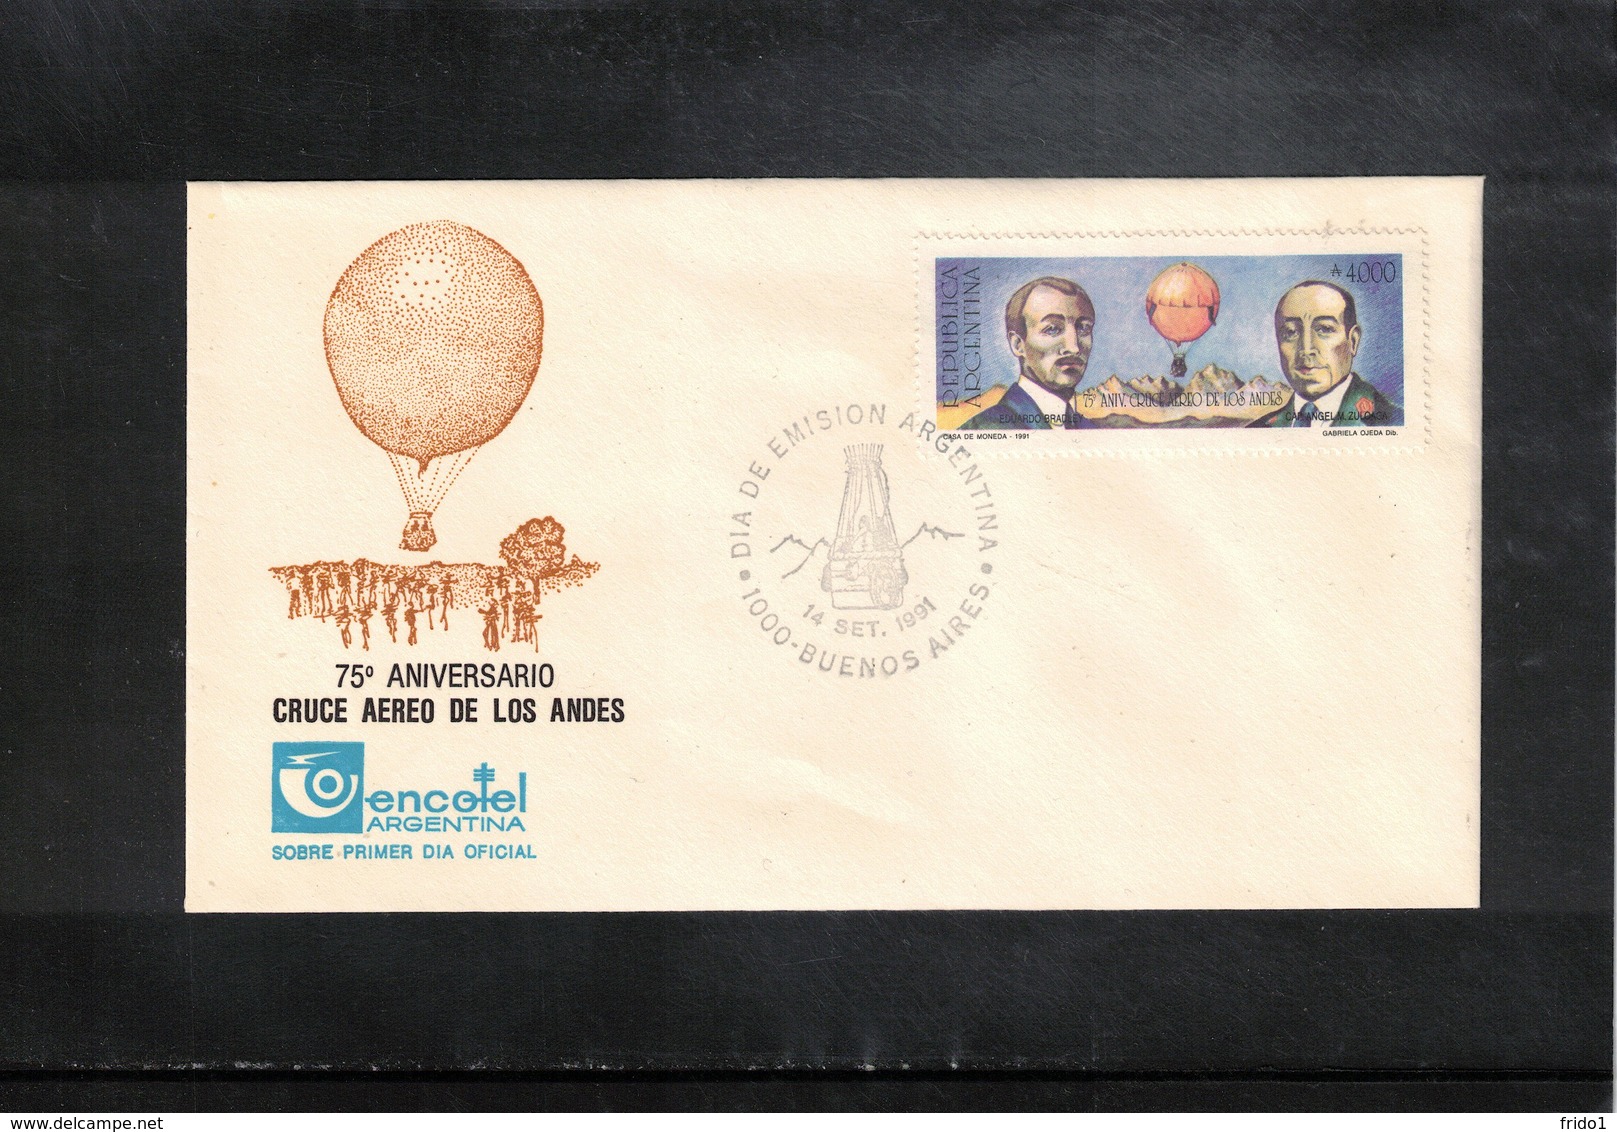 Argentina 1991 75th Anniversary Of The First Balloon Crossing Of Andes Interesting Cover - Cartas & Documentos